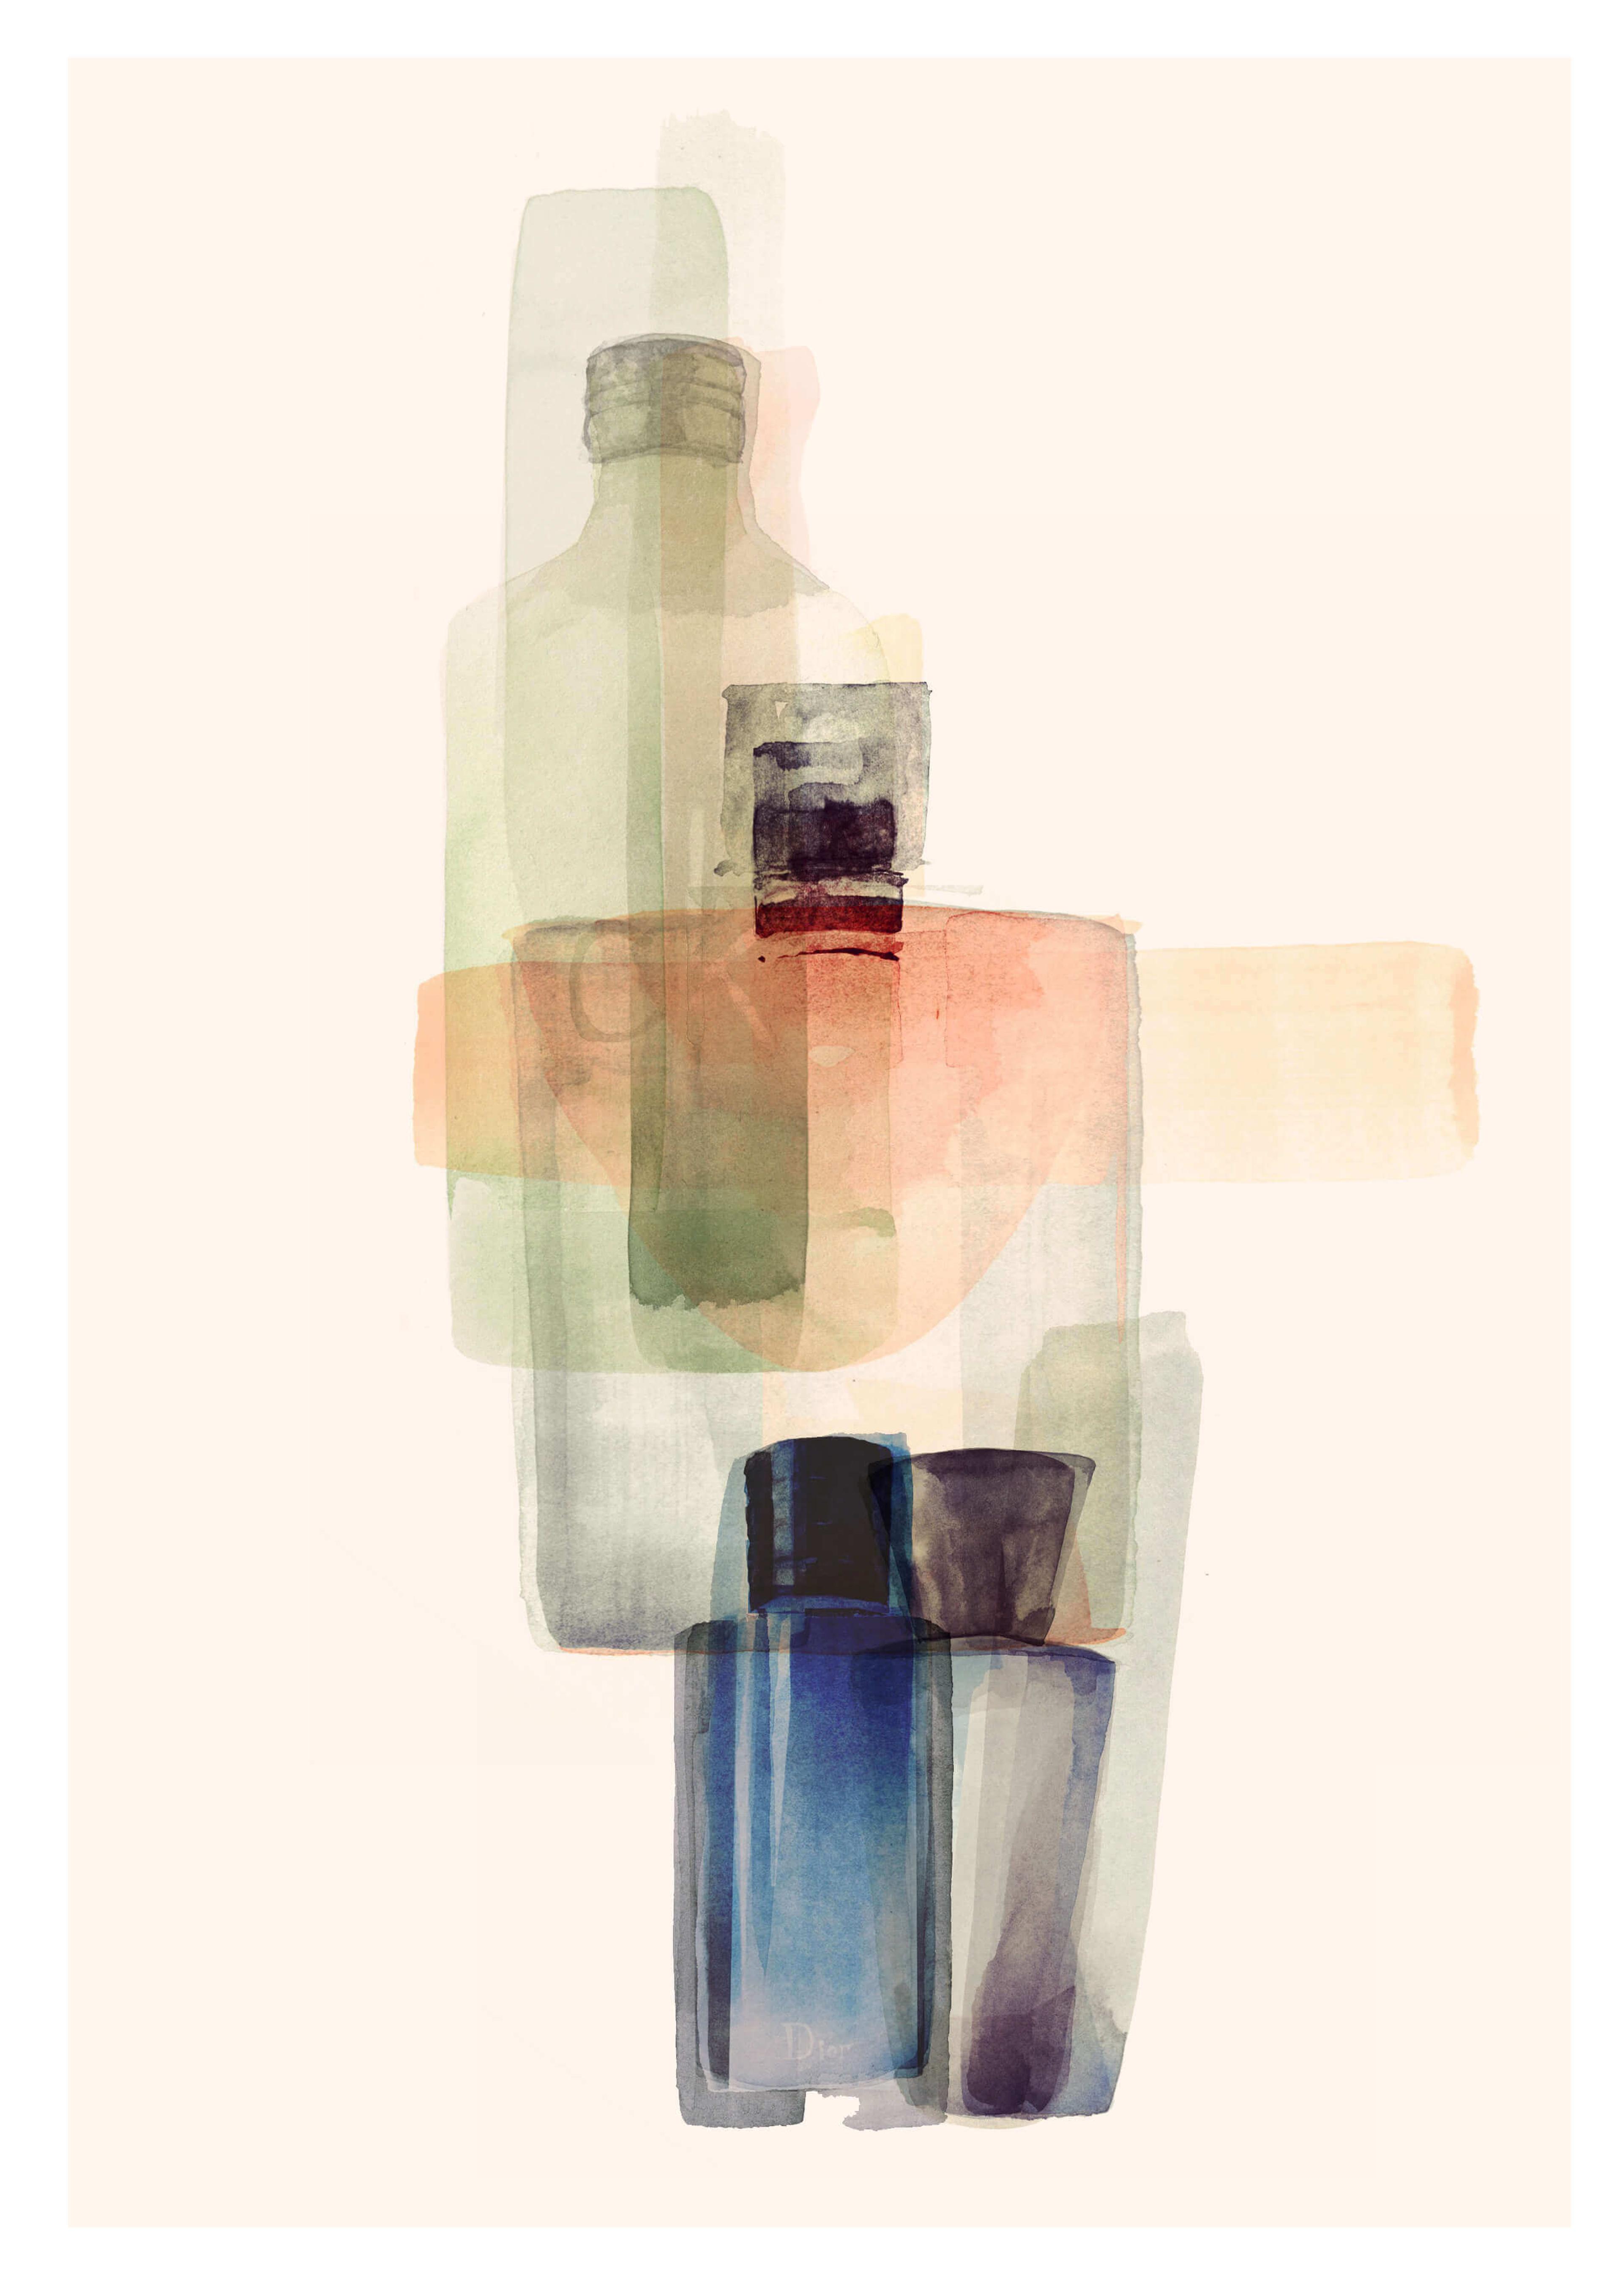 Painterly illustration of perfume bottles layered over each other.